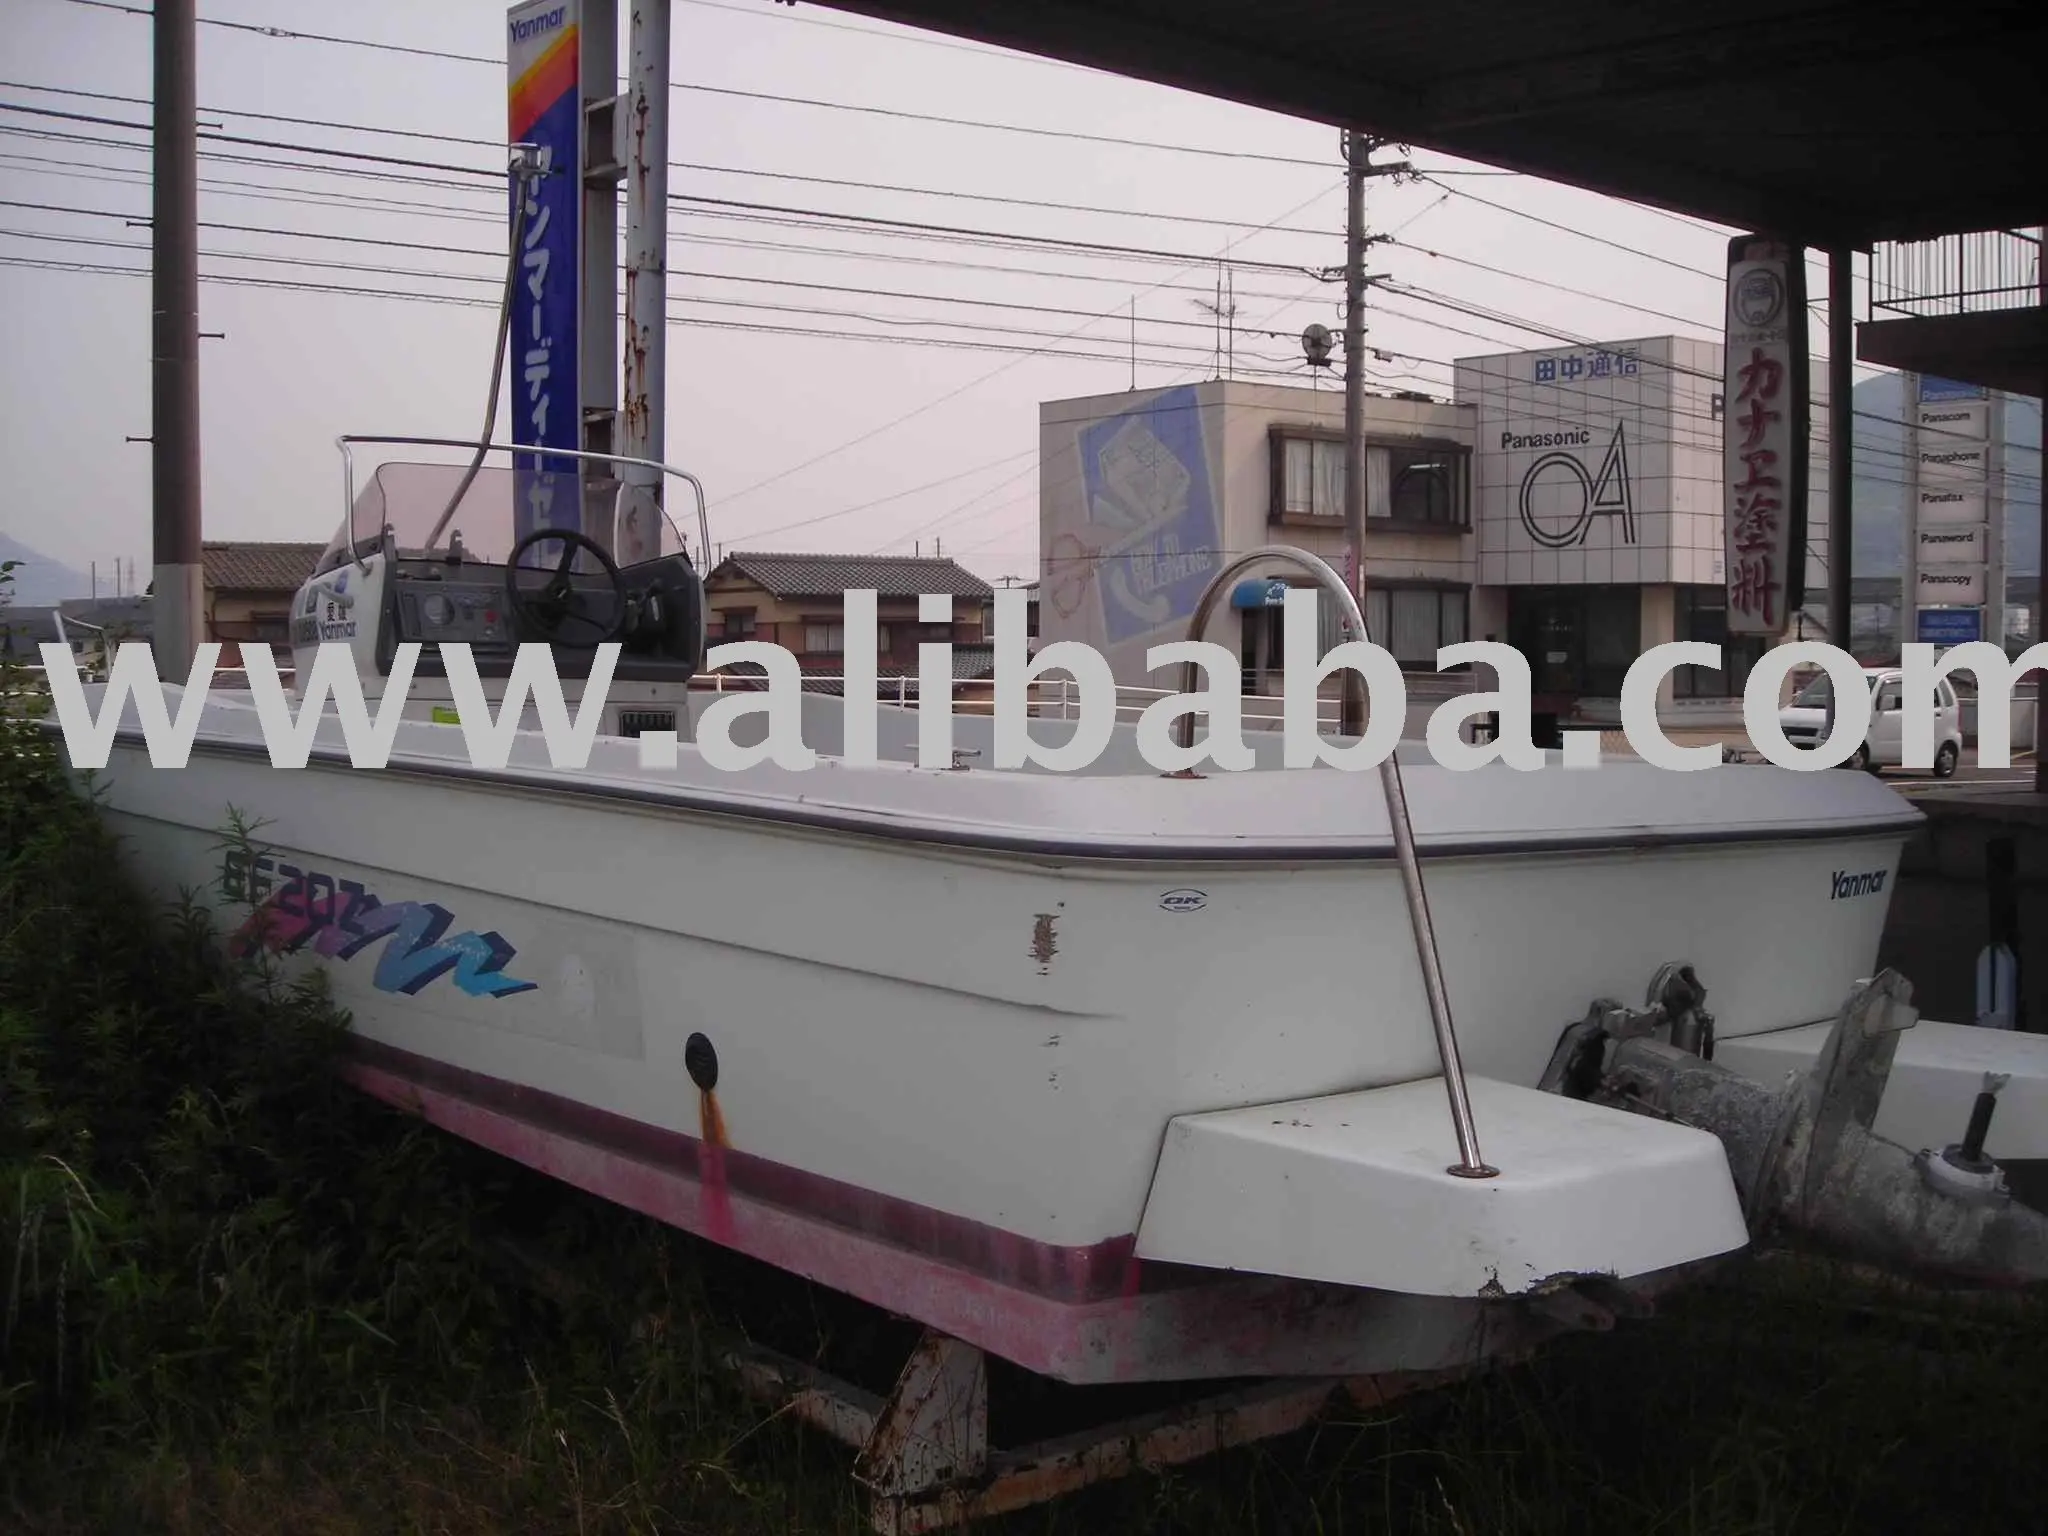 Buy Used Boats Product on Alibaba.com